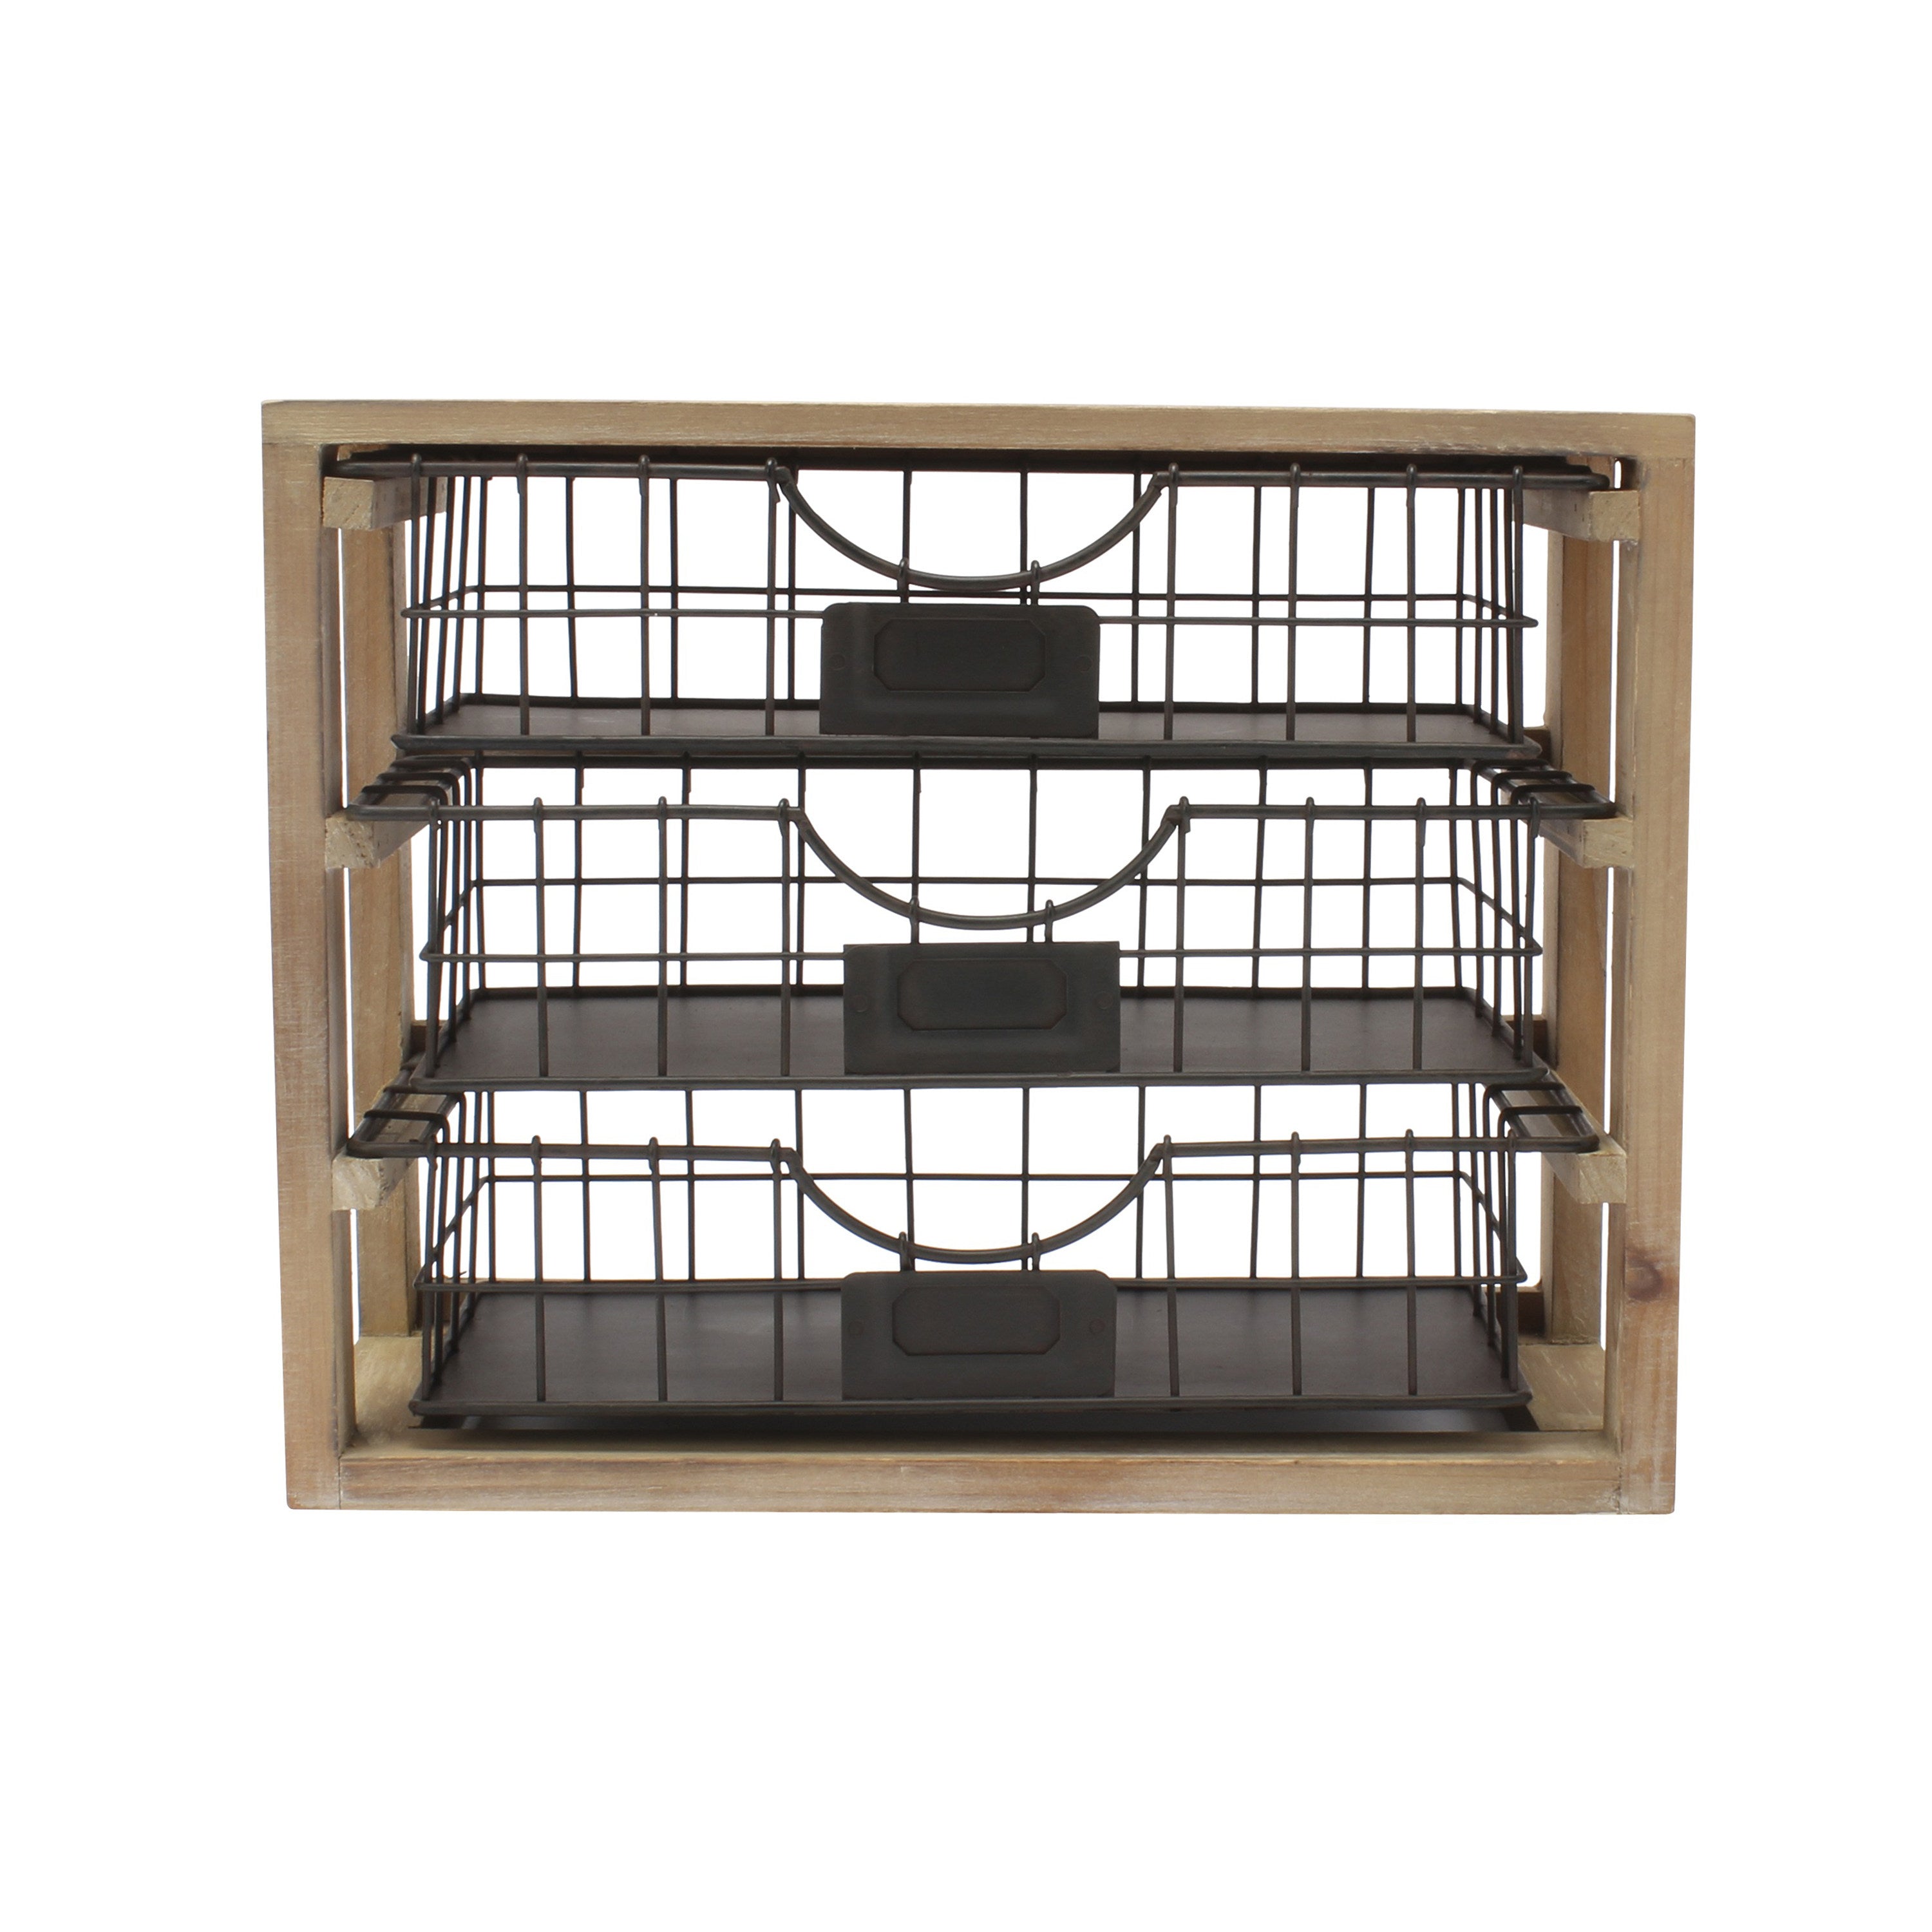 Kate and Laurel Tanner Wall Organizer with Mirror and Hooks, 28 x 8 x 24,  Rustic Brown and Black, Farmhouse Wall Organization Home Office Station  with Baskets for Modular Storage – kateandlaurel